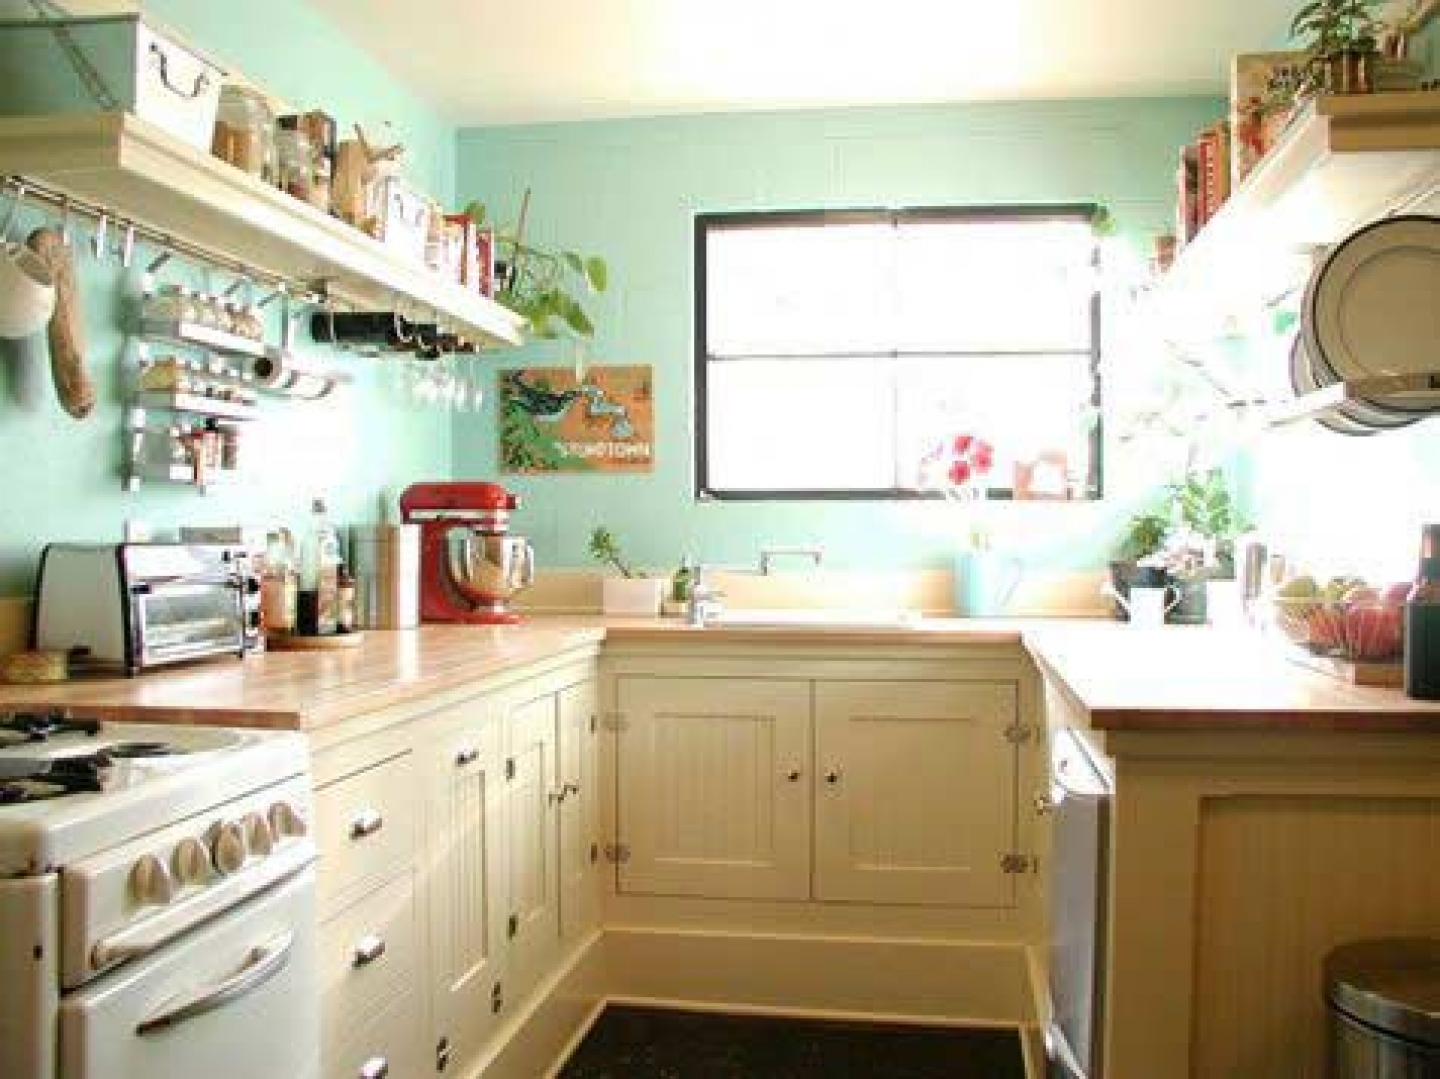 design ideas for small kitchens photo - 2